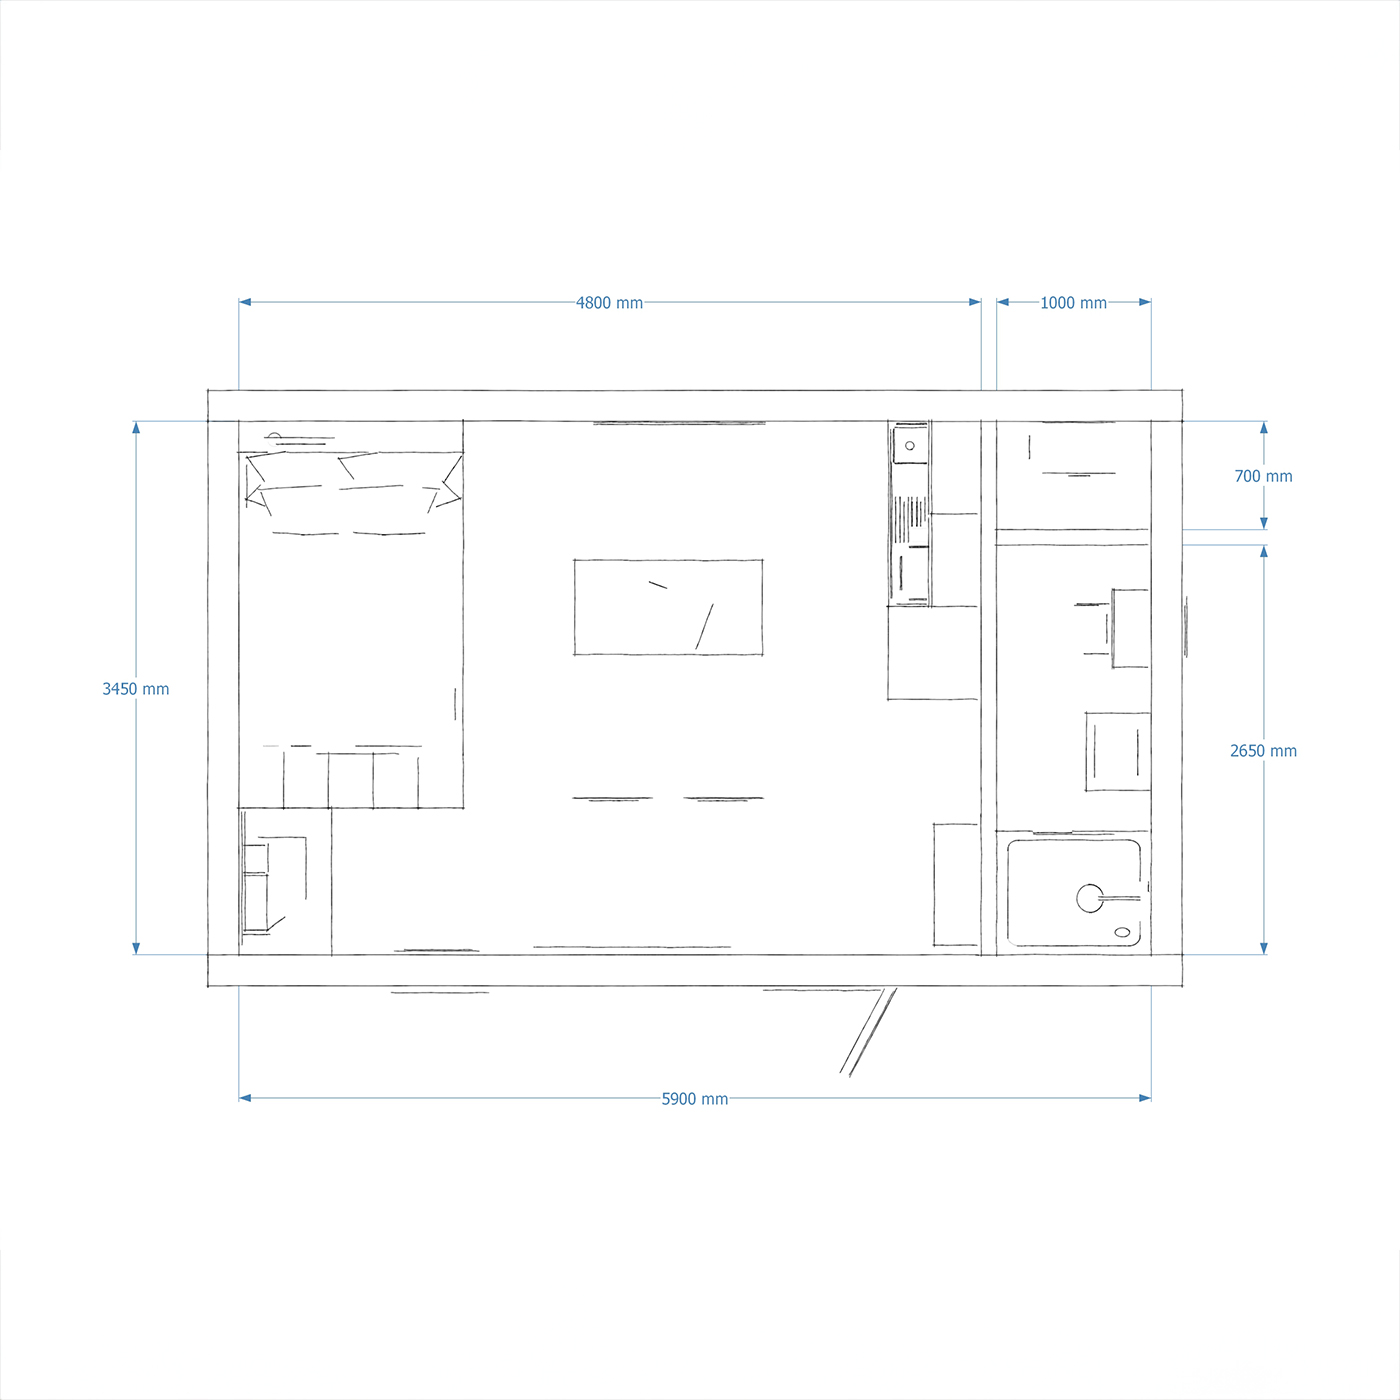 Interior dimensions for live-in garden room 3.9m by 6.2m